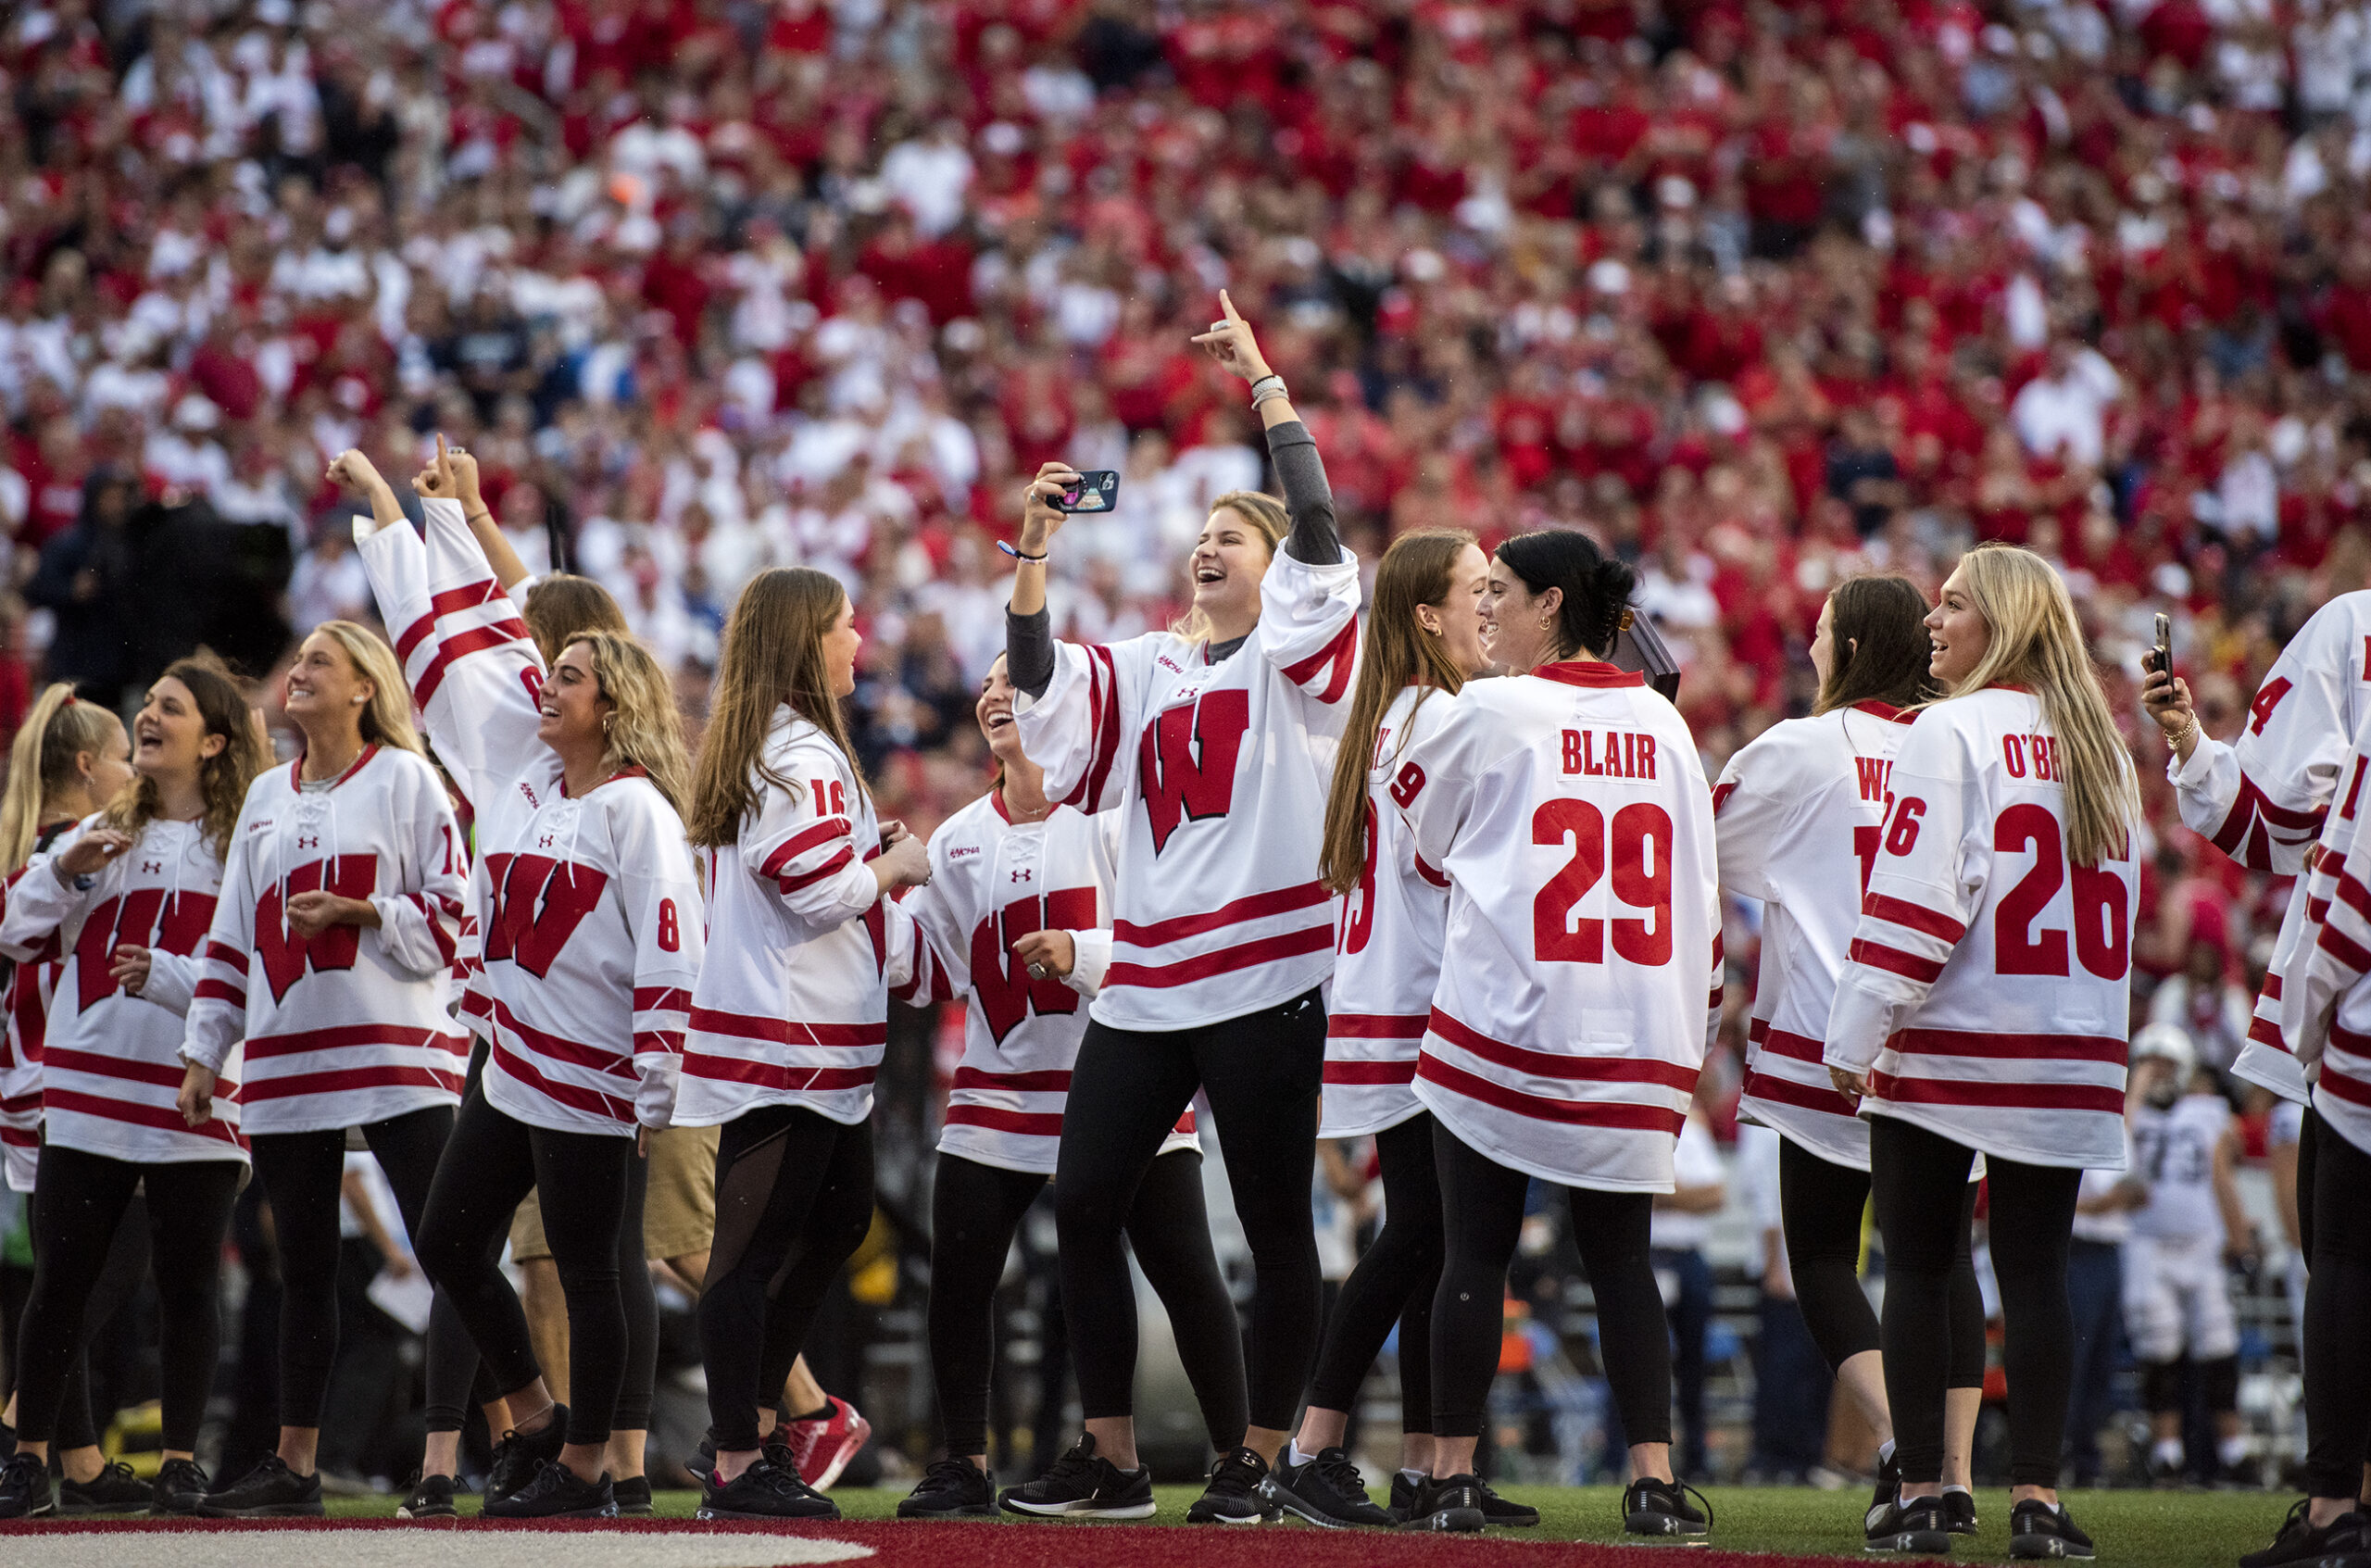 The Wisconsin women’s hockey team steps onto the field at Camp Randall as fans cheer.